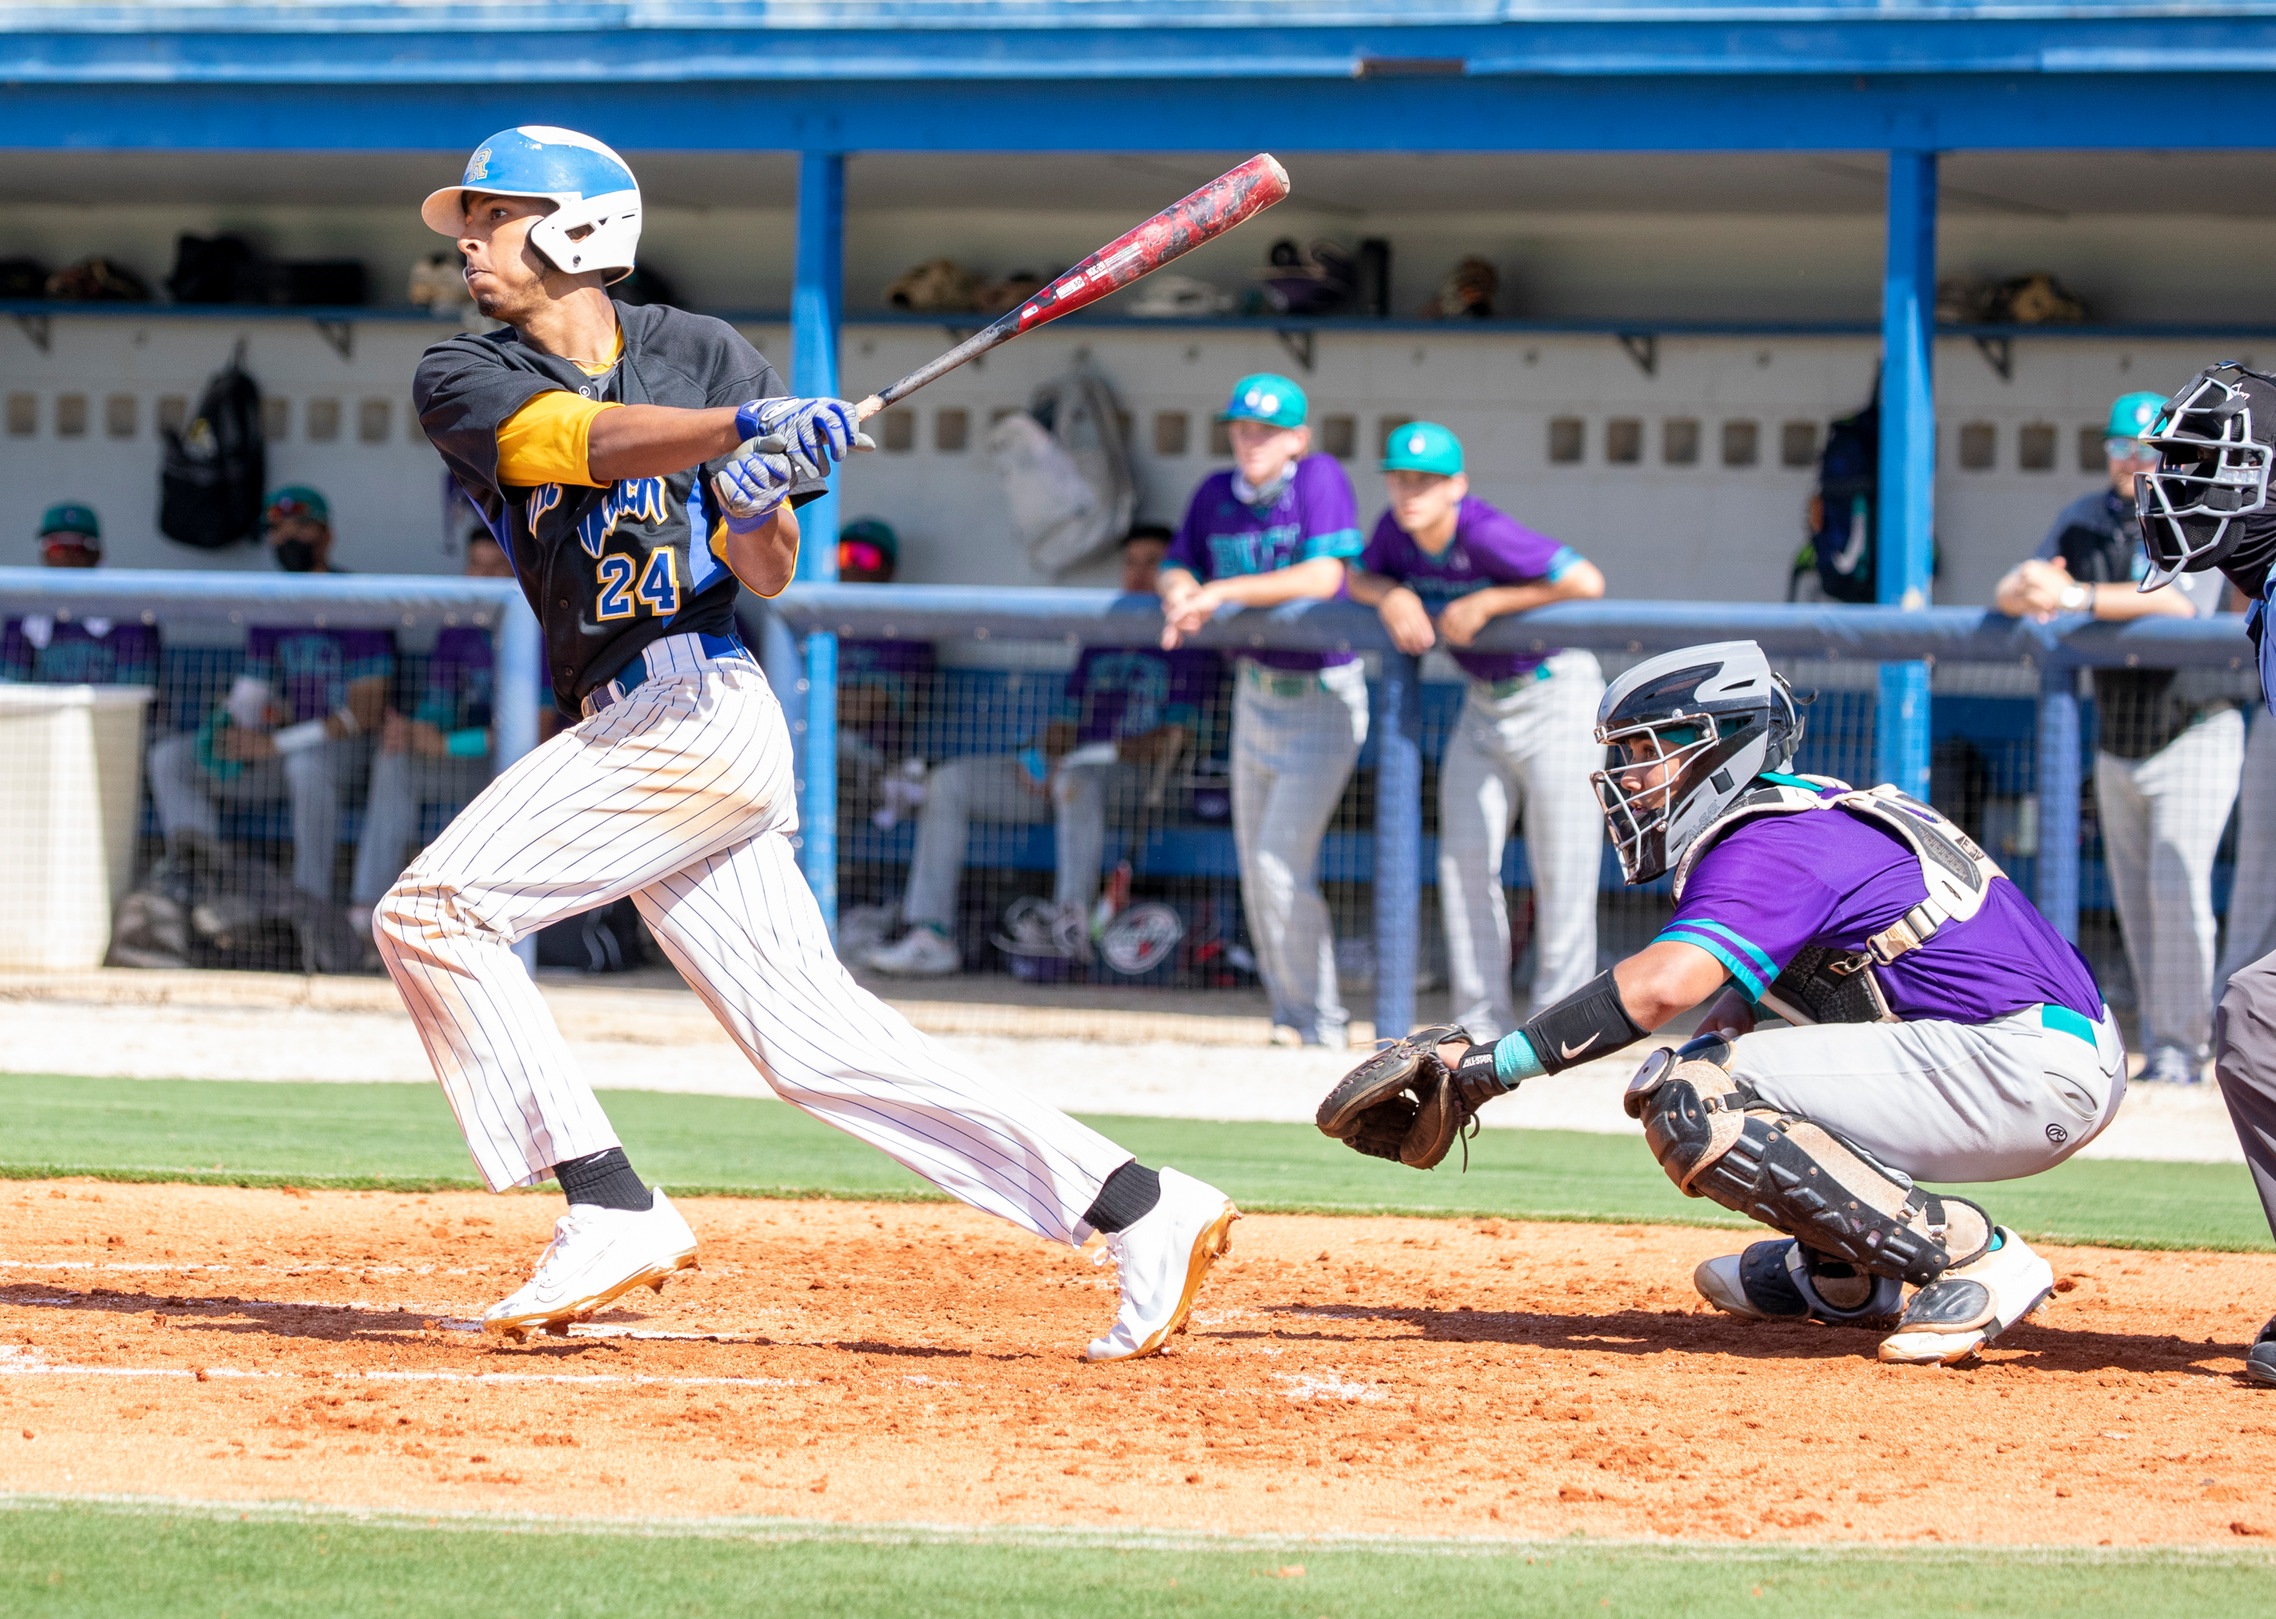 Indian River State College Pioneers Falls to Palm Beach State College Panthers Varsity After Seventh Inning Score